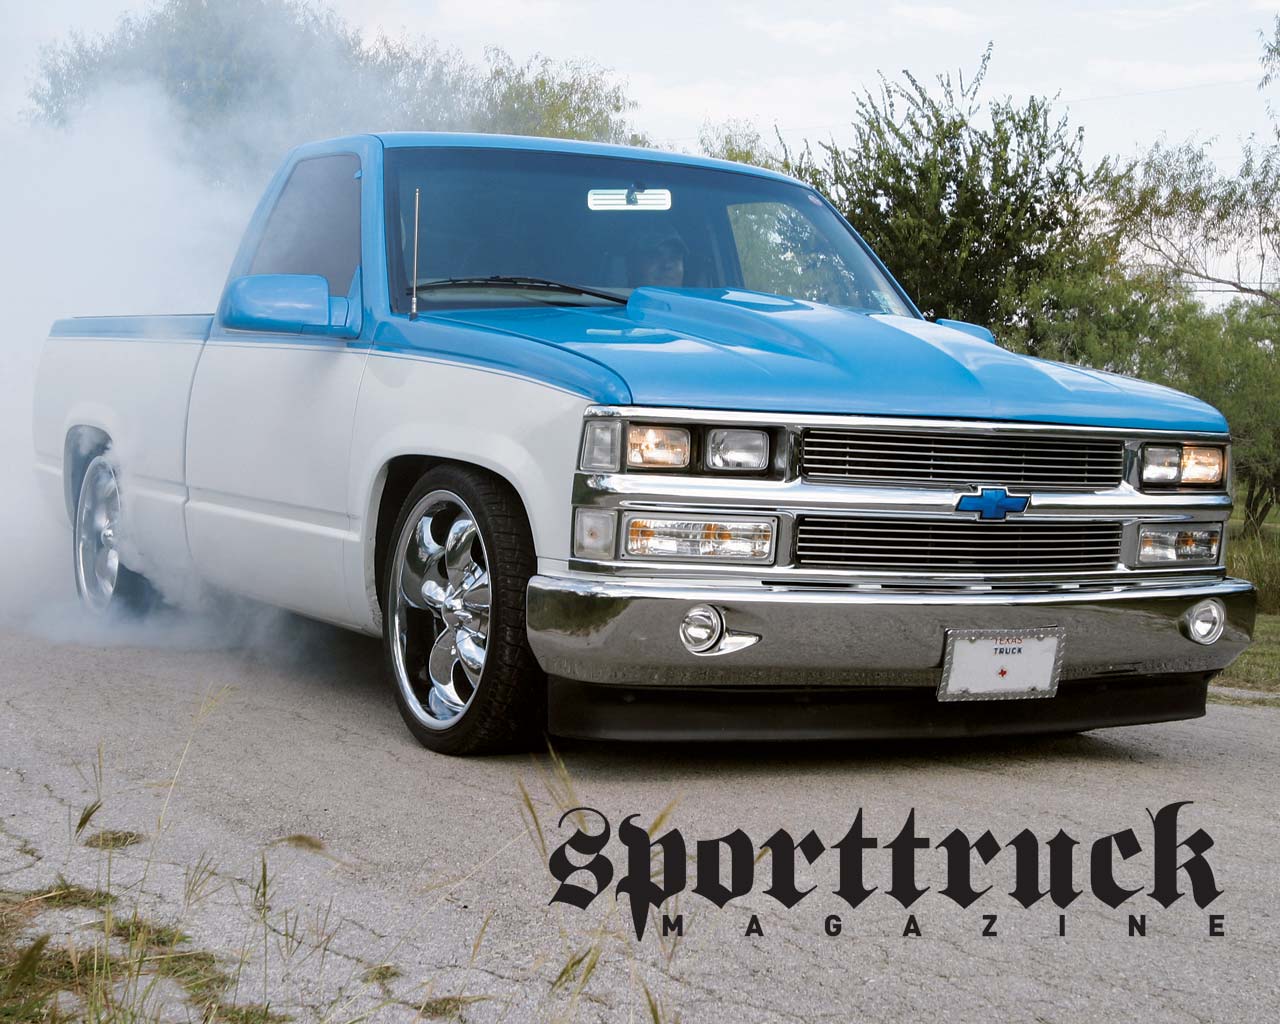 Chevy Truck Wallpaper HD In Cars Imageci